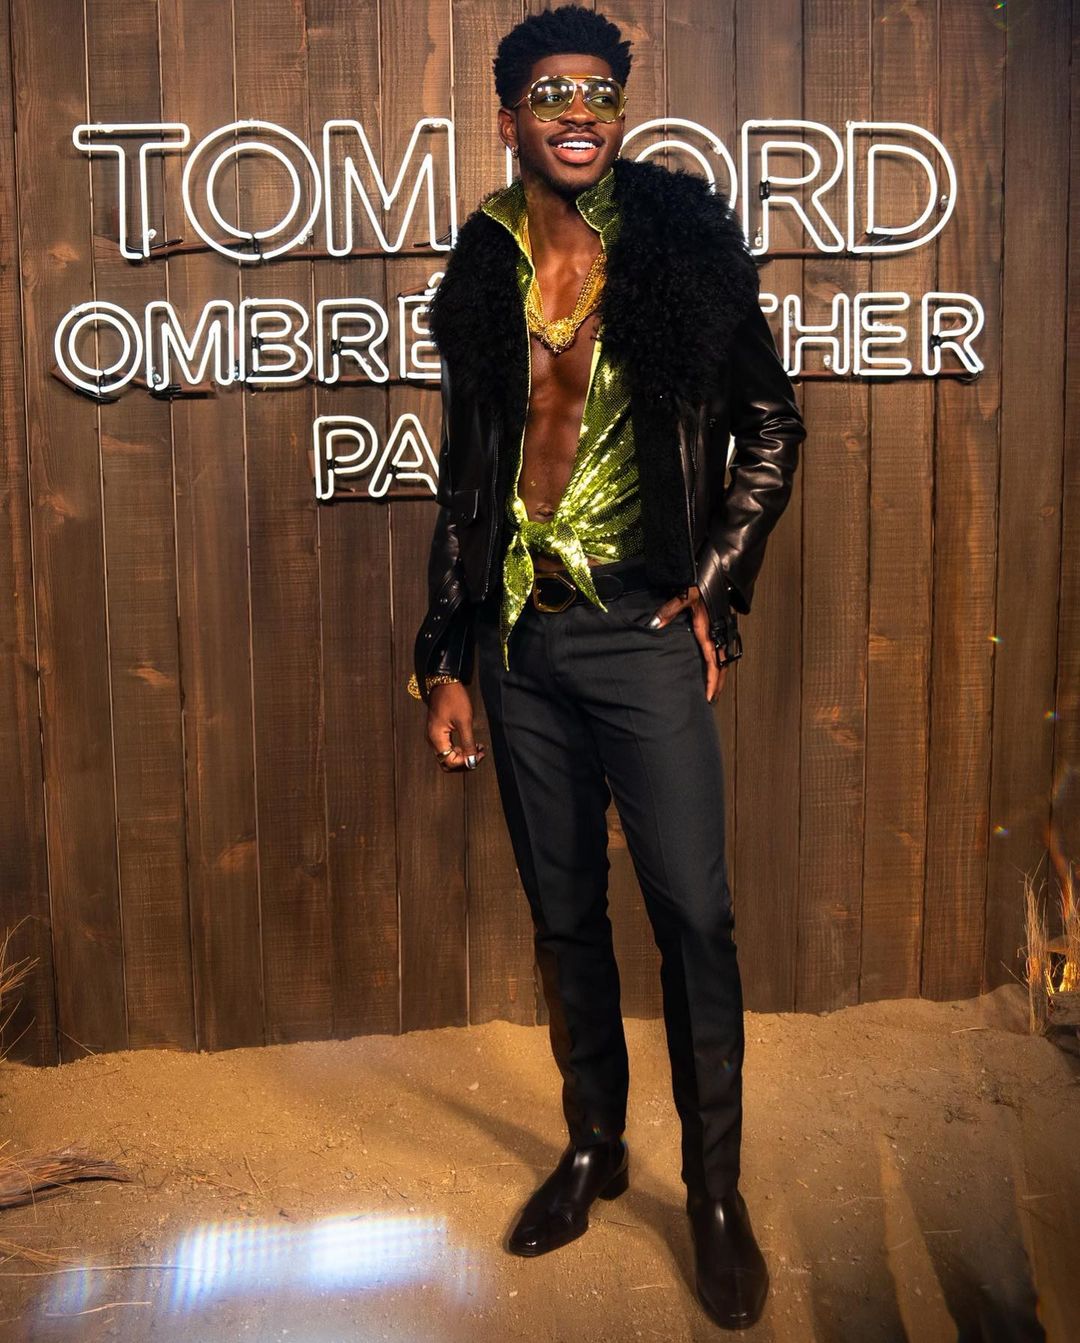 SPOTTED: Lil Nas X dons Tom Ford for Fragrance Launch Party – PAUSE Online  | Men's Fashion, Street Style, Fashion News & Streetwear